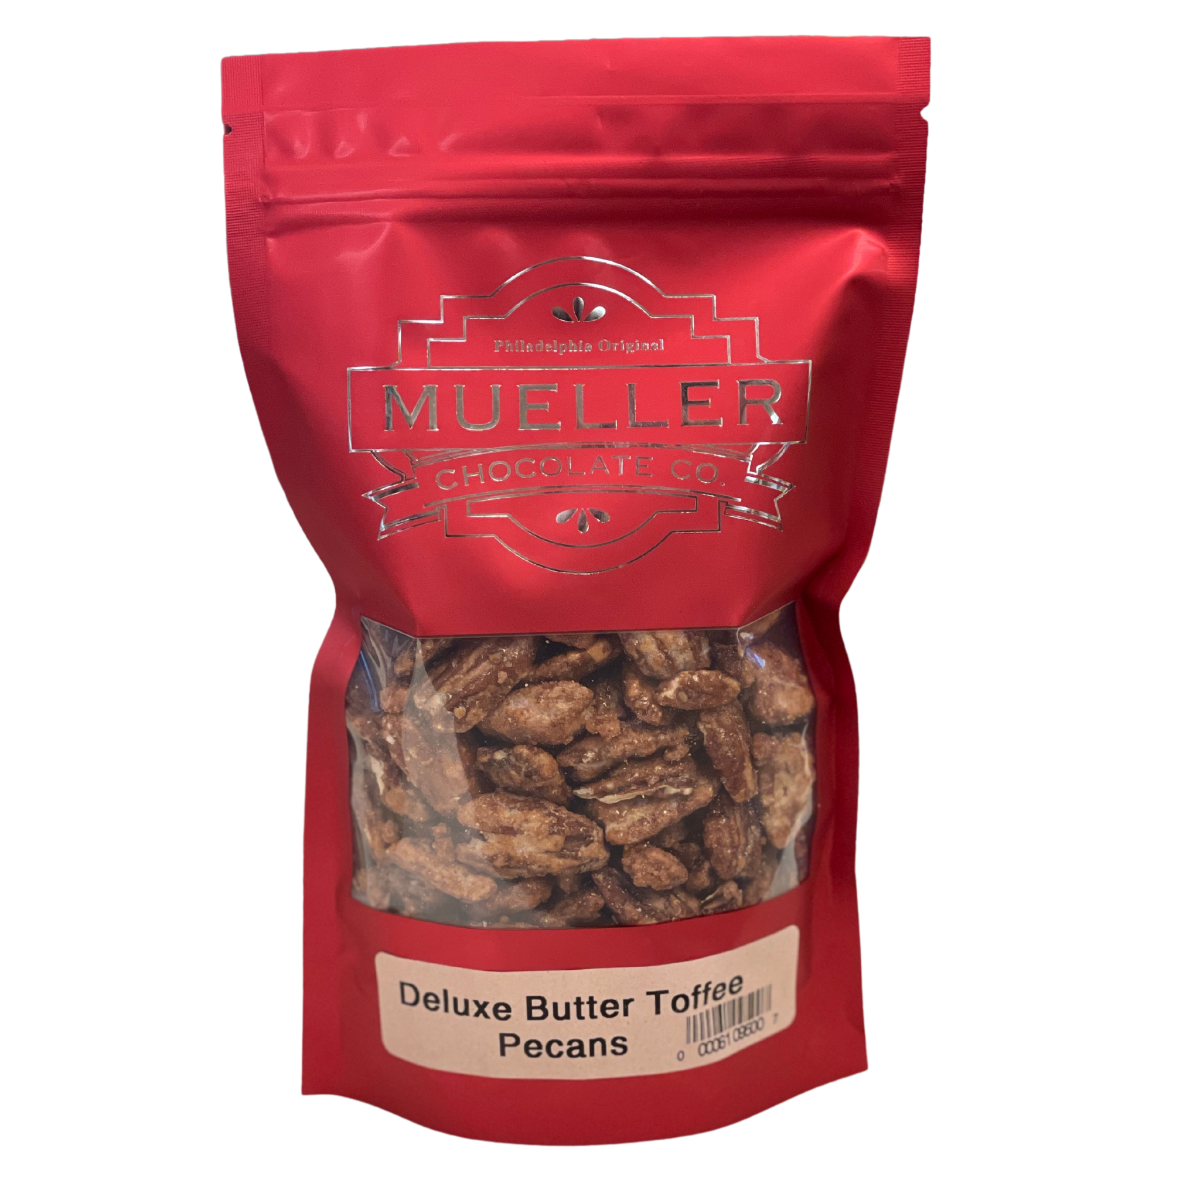 Deluxe Butter Toffee Pecan Holiday Bag